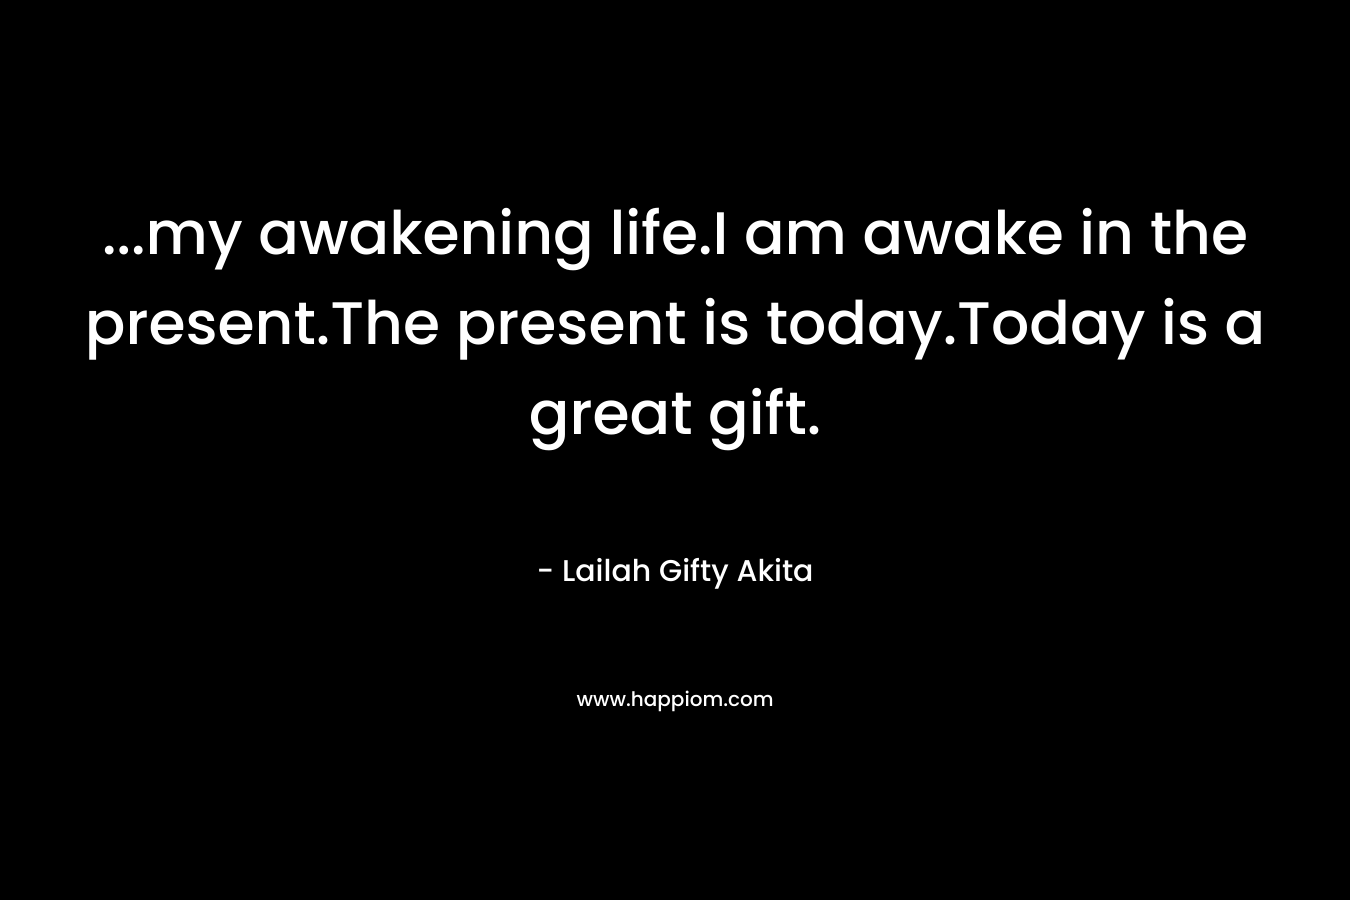 ...my awakening life.I am awake in the present.The present is today.Today is a great gift.